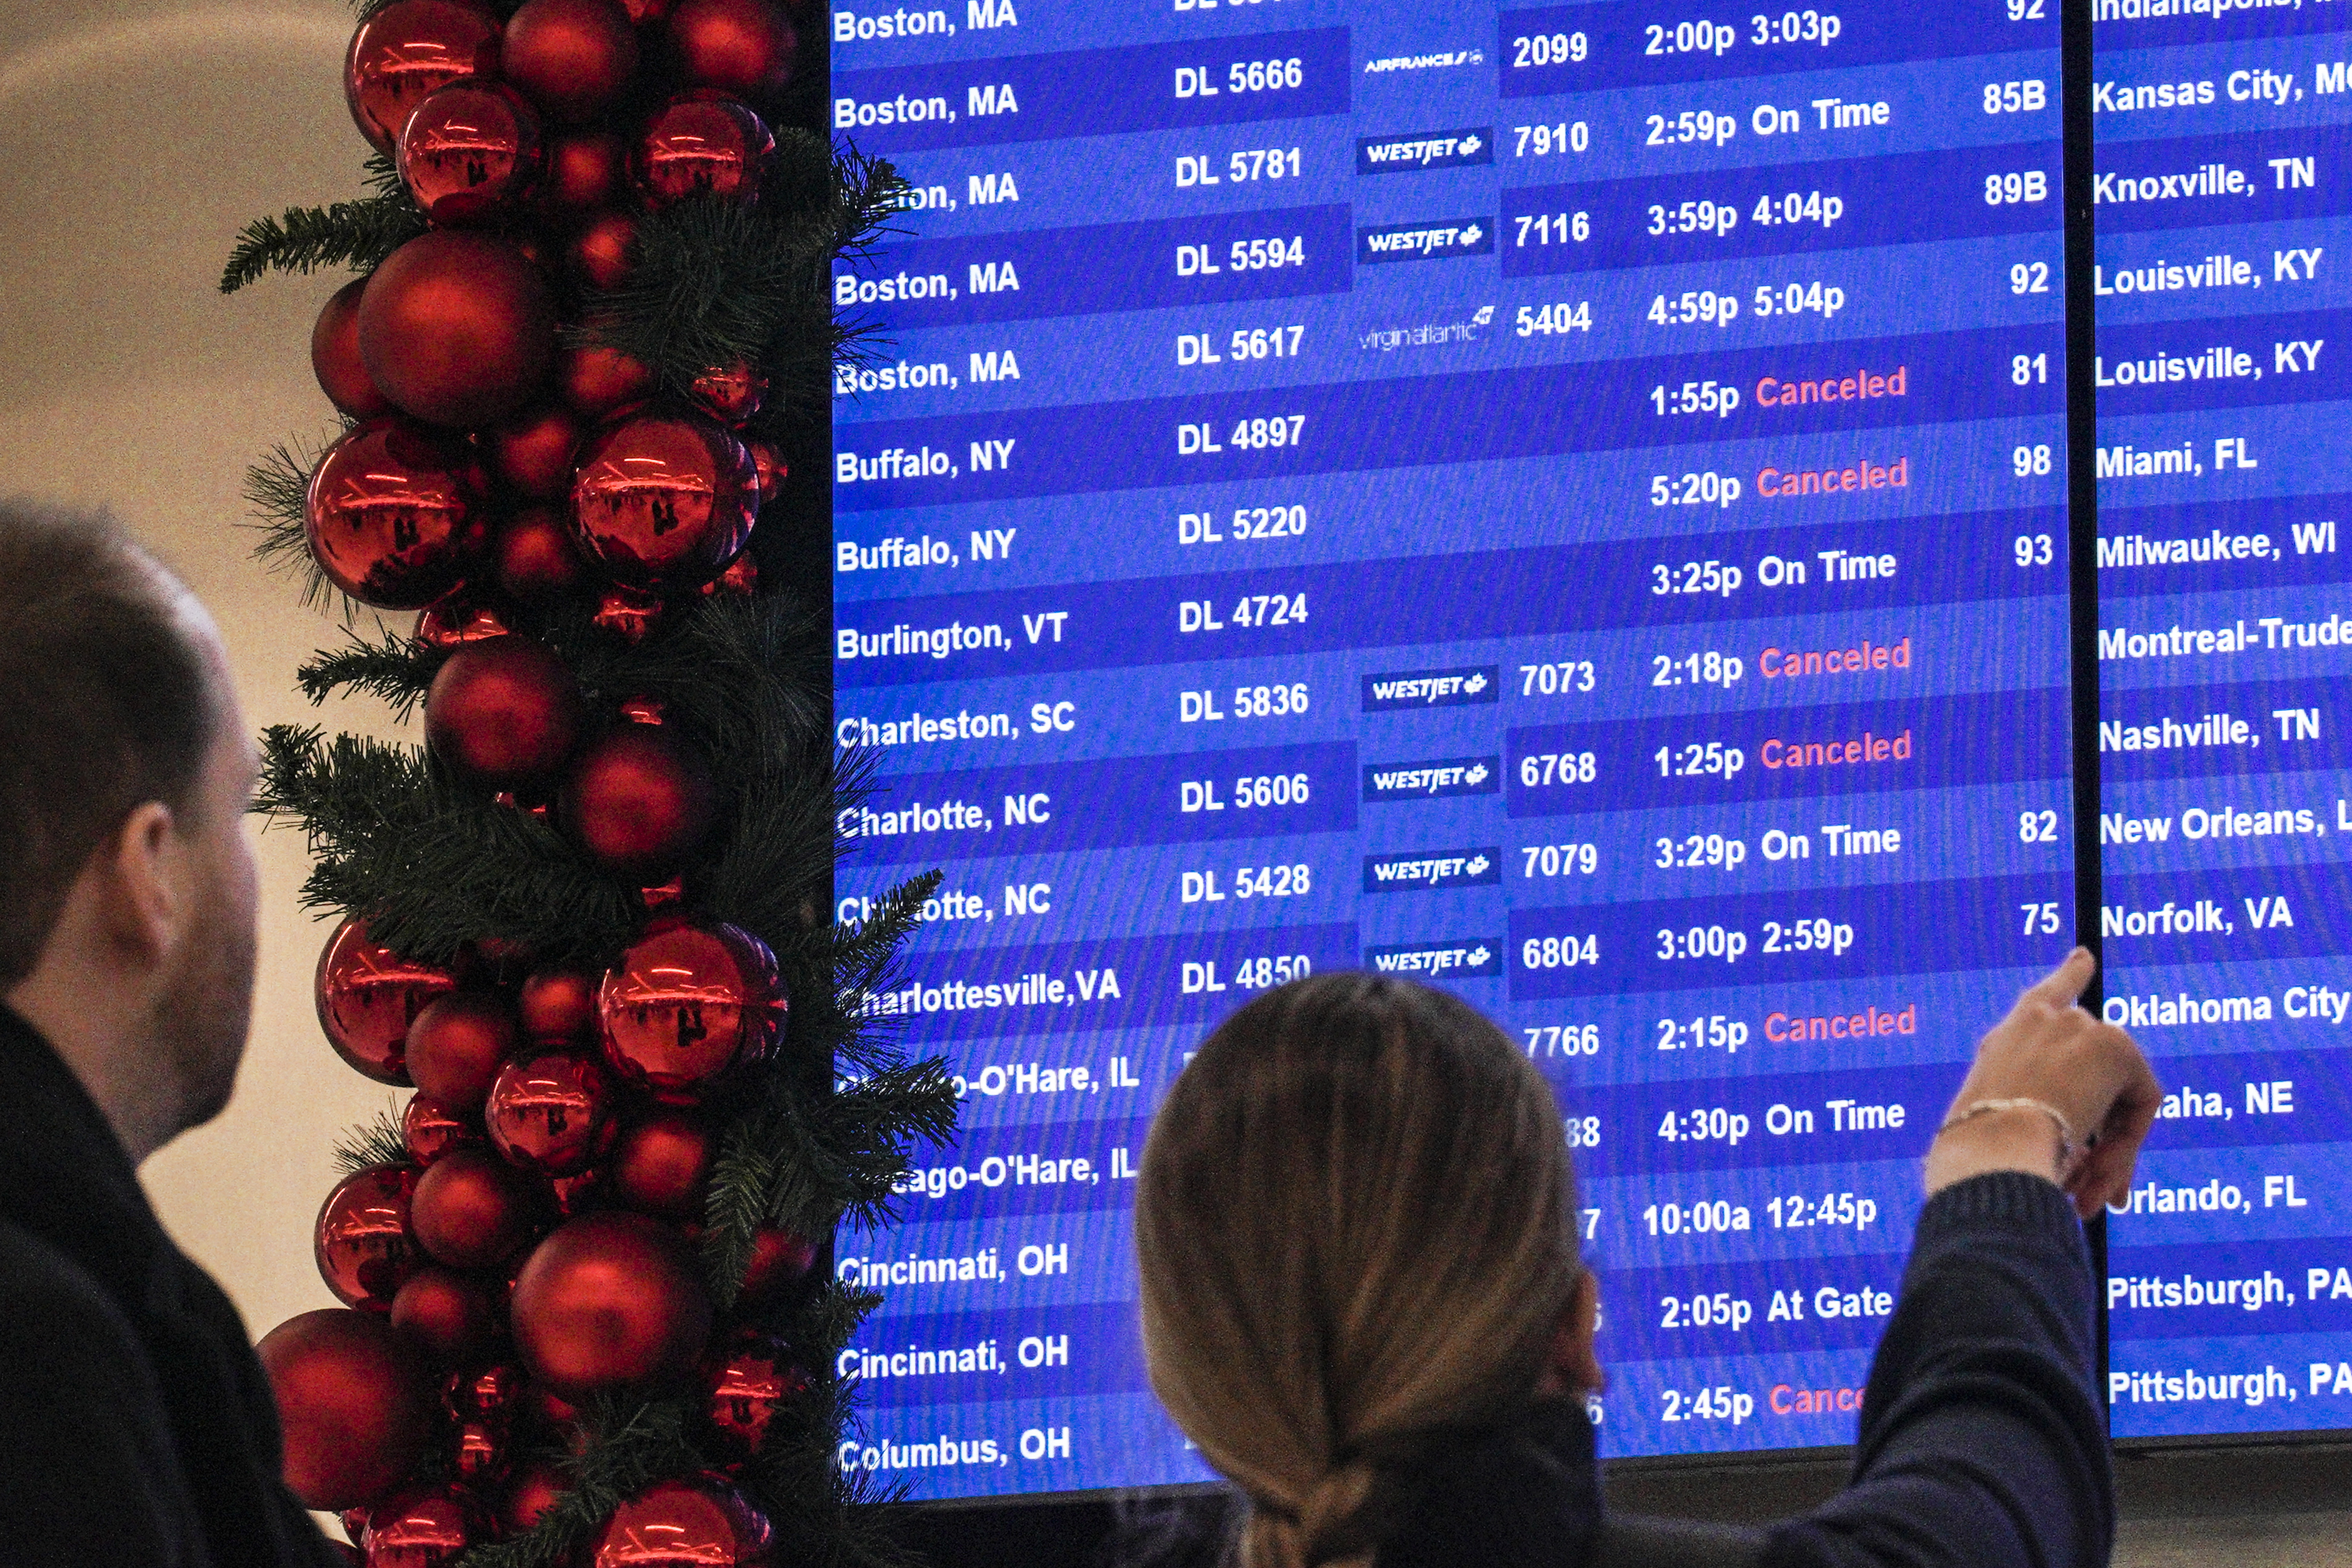 Passengers check flight departure schedule, some showing cancellations, as they arrive at the Delta terminal at Laguardia Airport, Friday Dec. 23, 2022, in New York. (AP Photo/Bebeto Matthews)